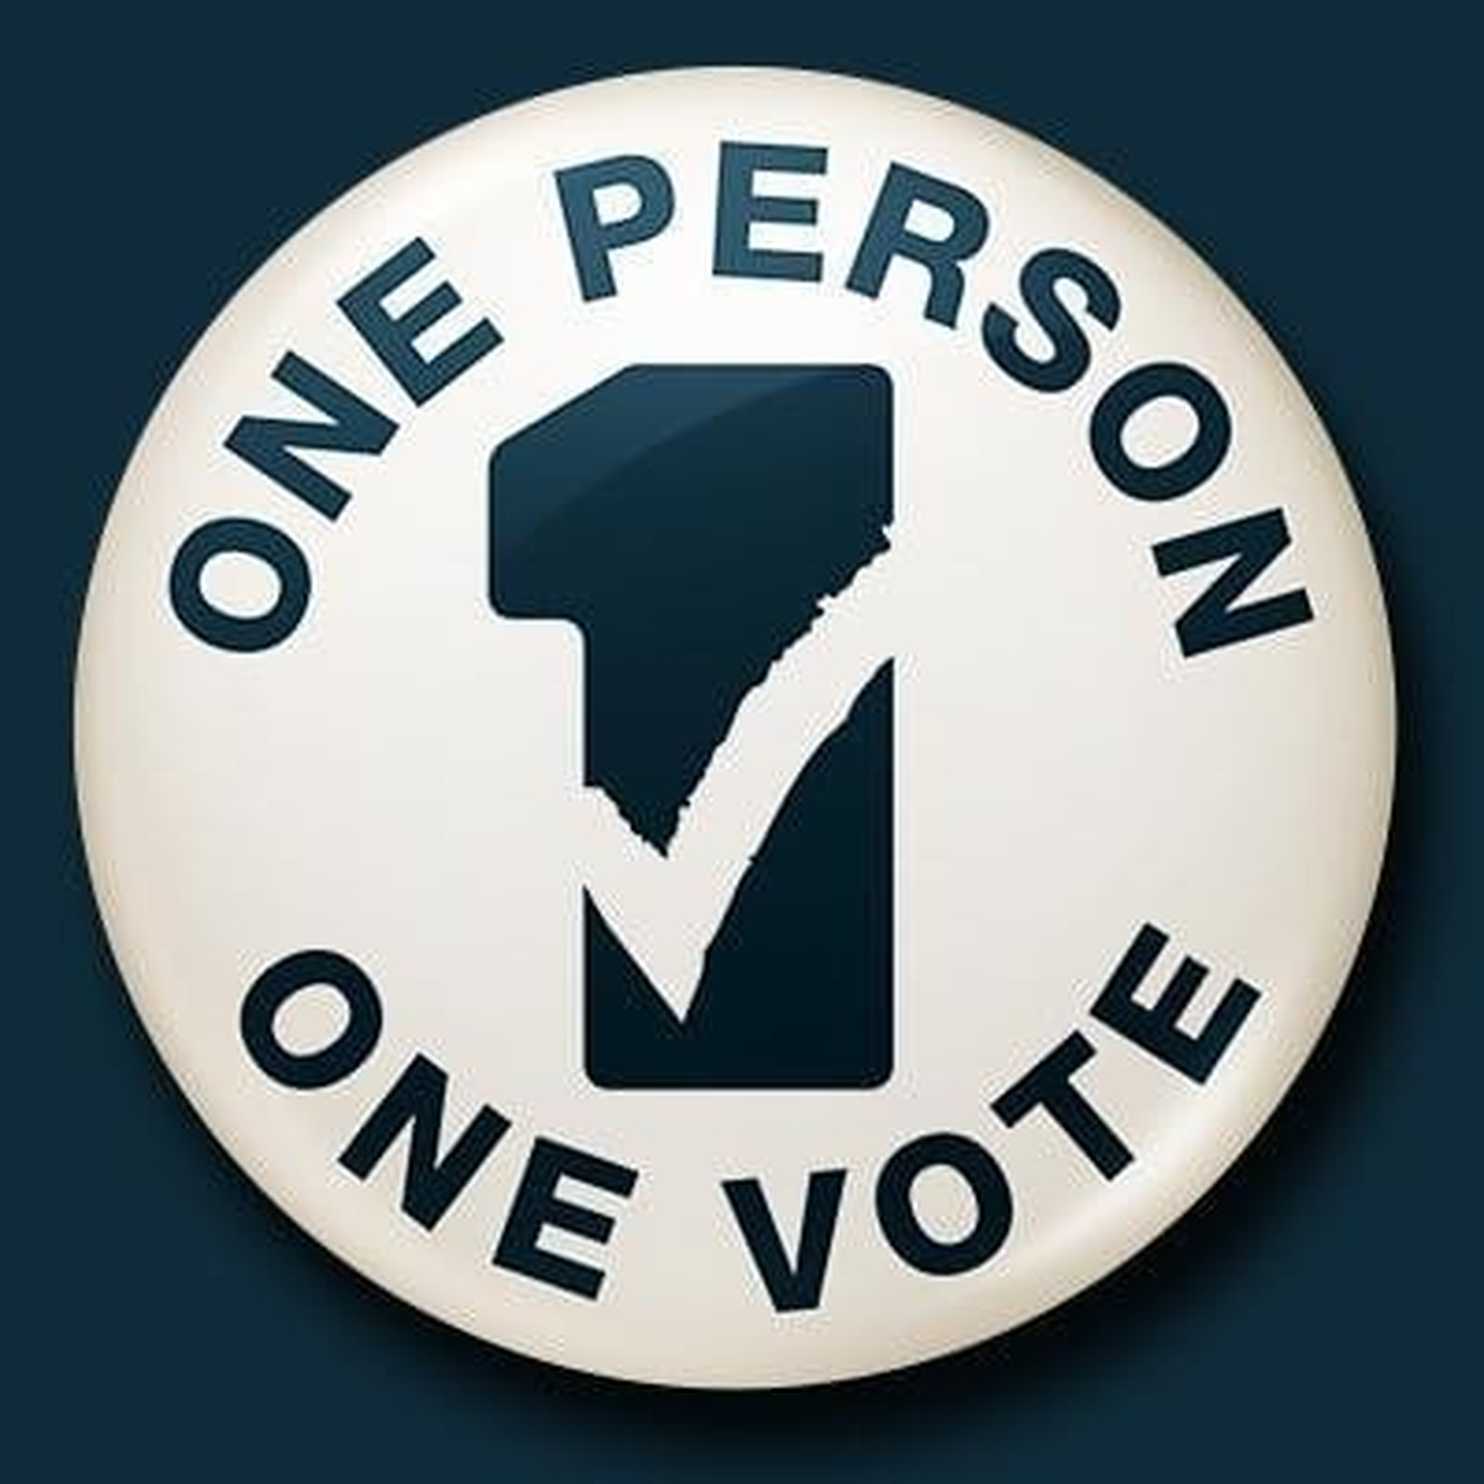 1 Person Logo - Thoughts on today's “one person, one vote” decision - The Washington ...